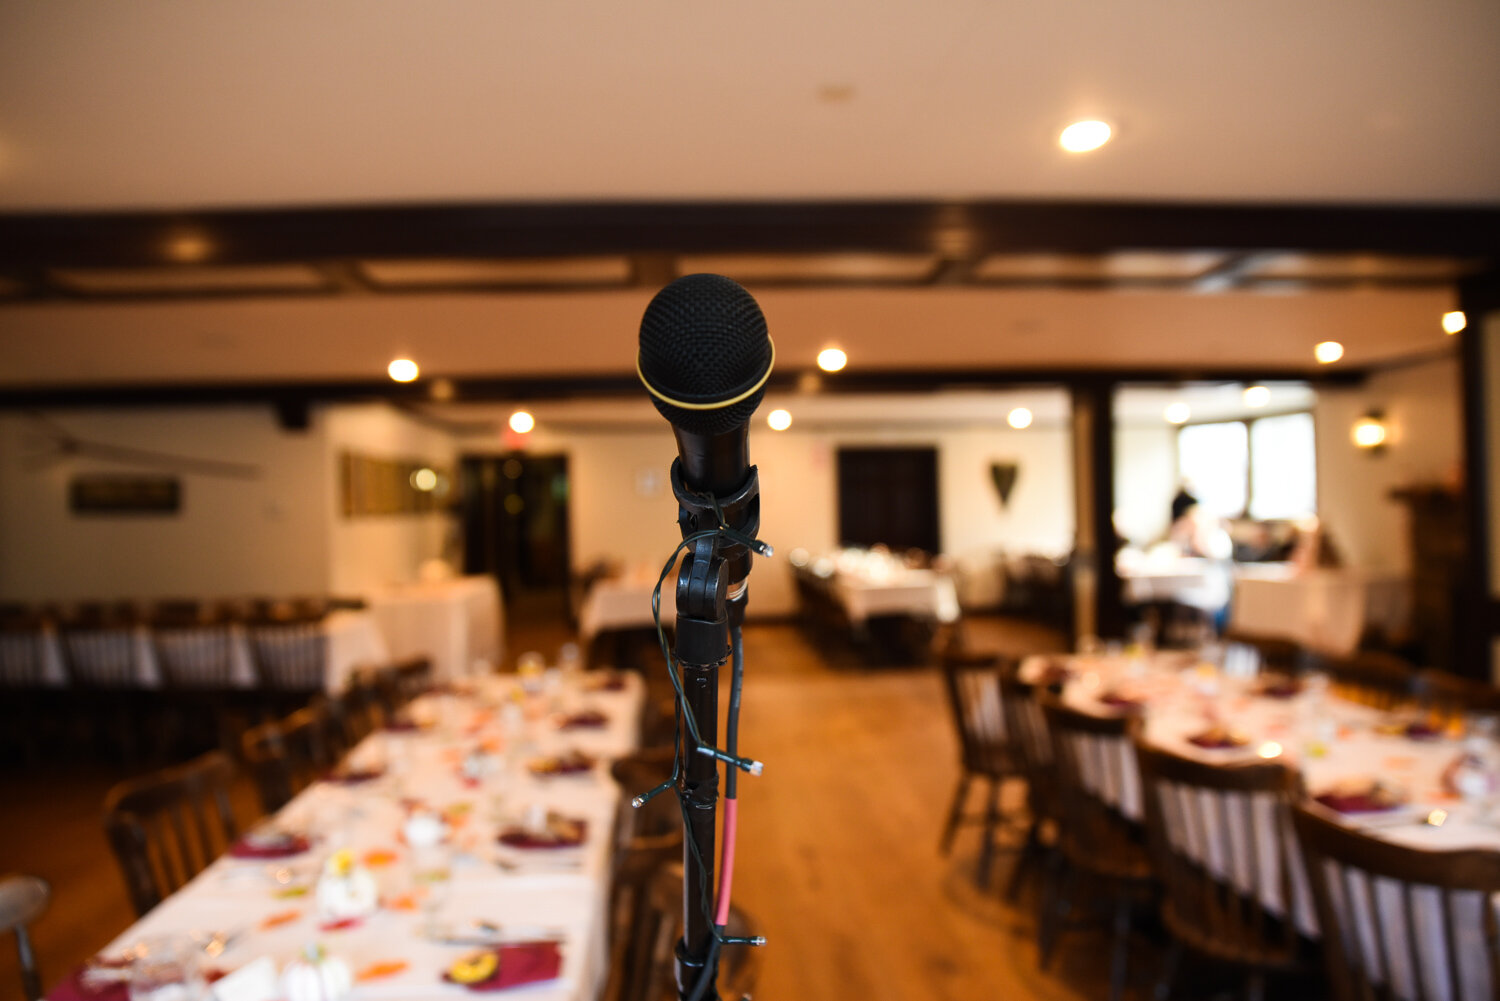 Serena and Zach Kilmsith wedding at Ye Olde Tavern in West Brookfield, MA photographed by Kara Emily Krantz Photography